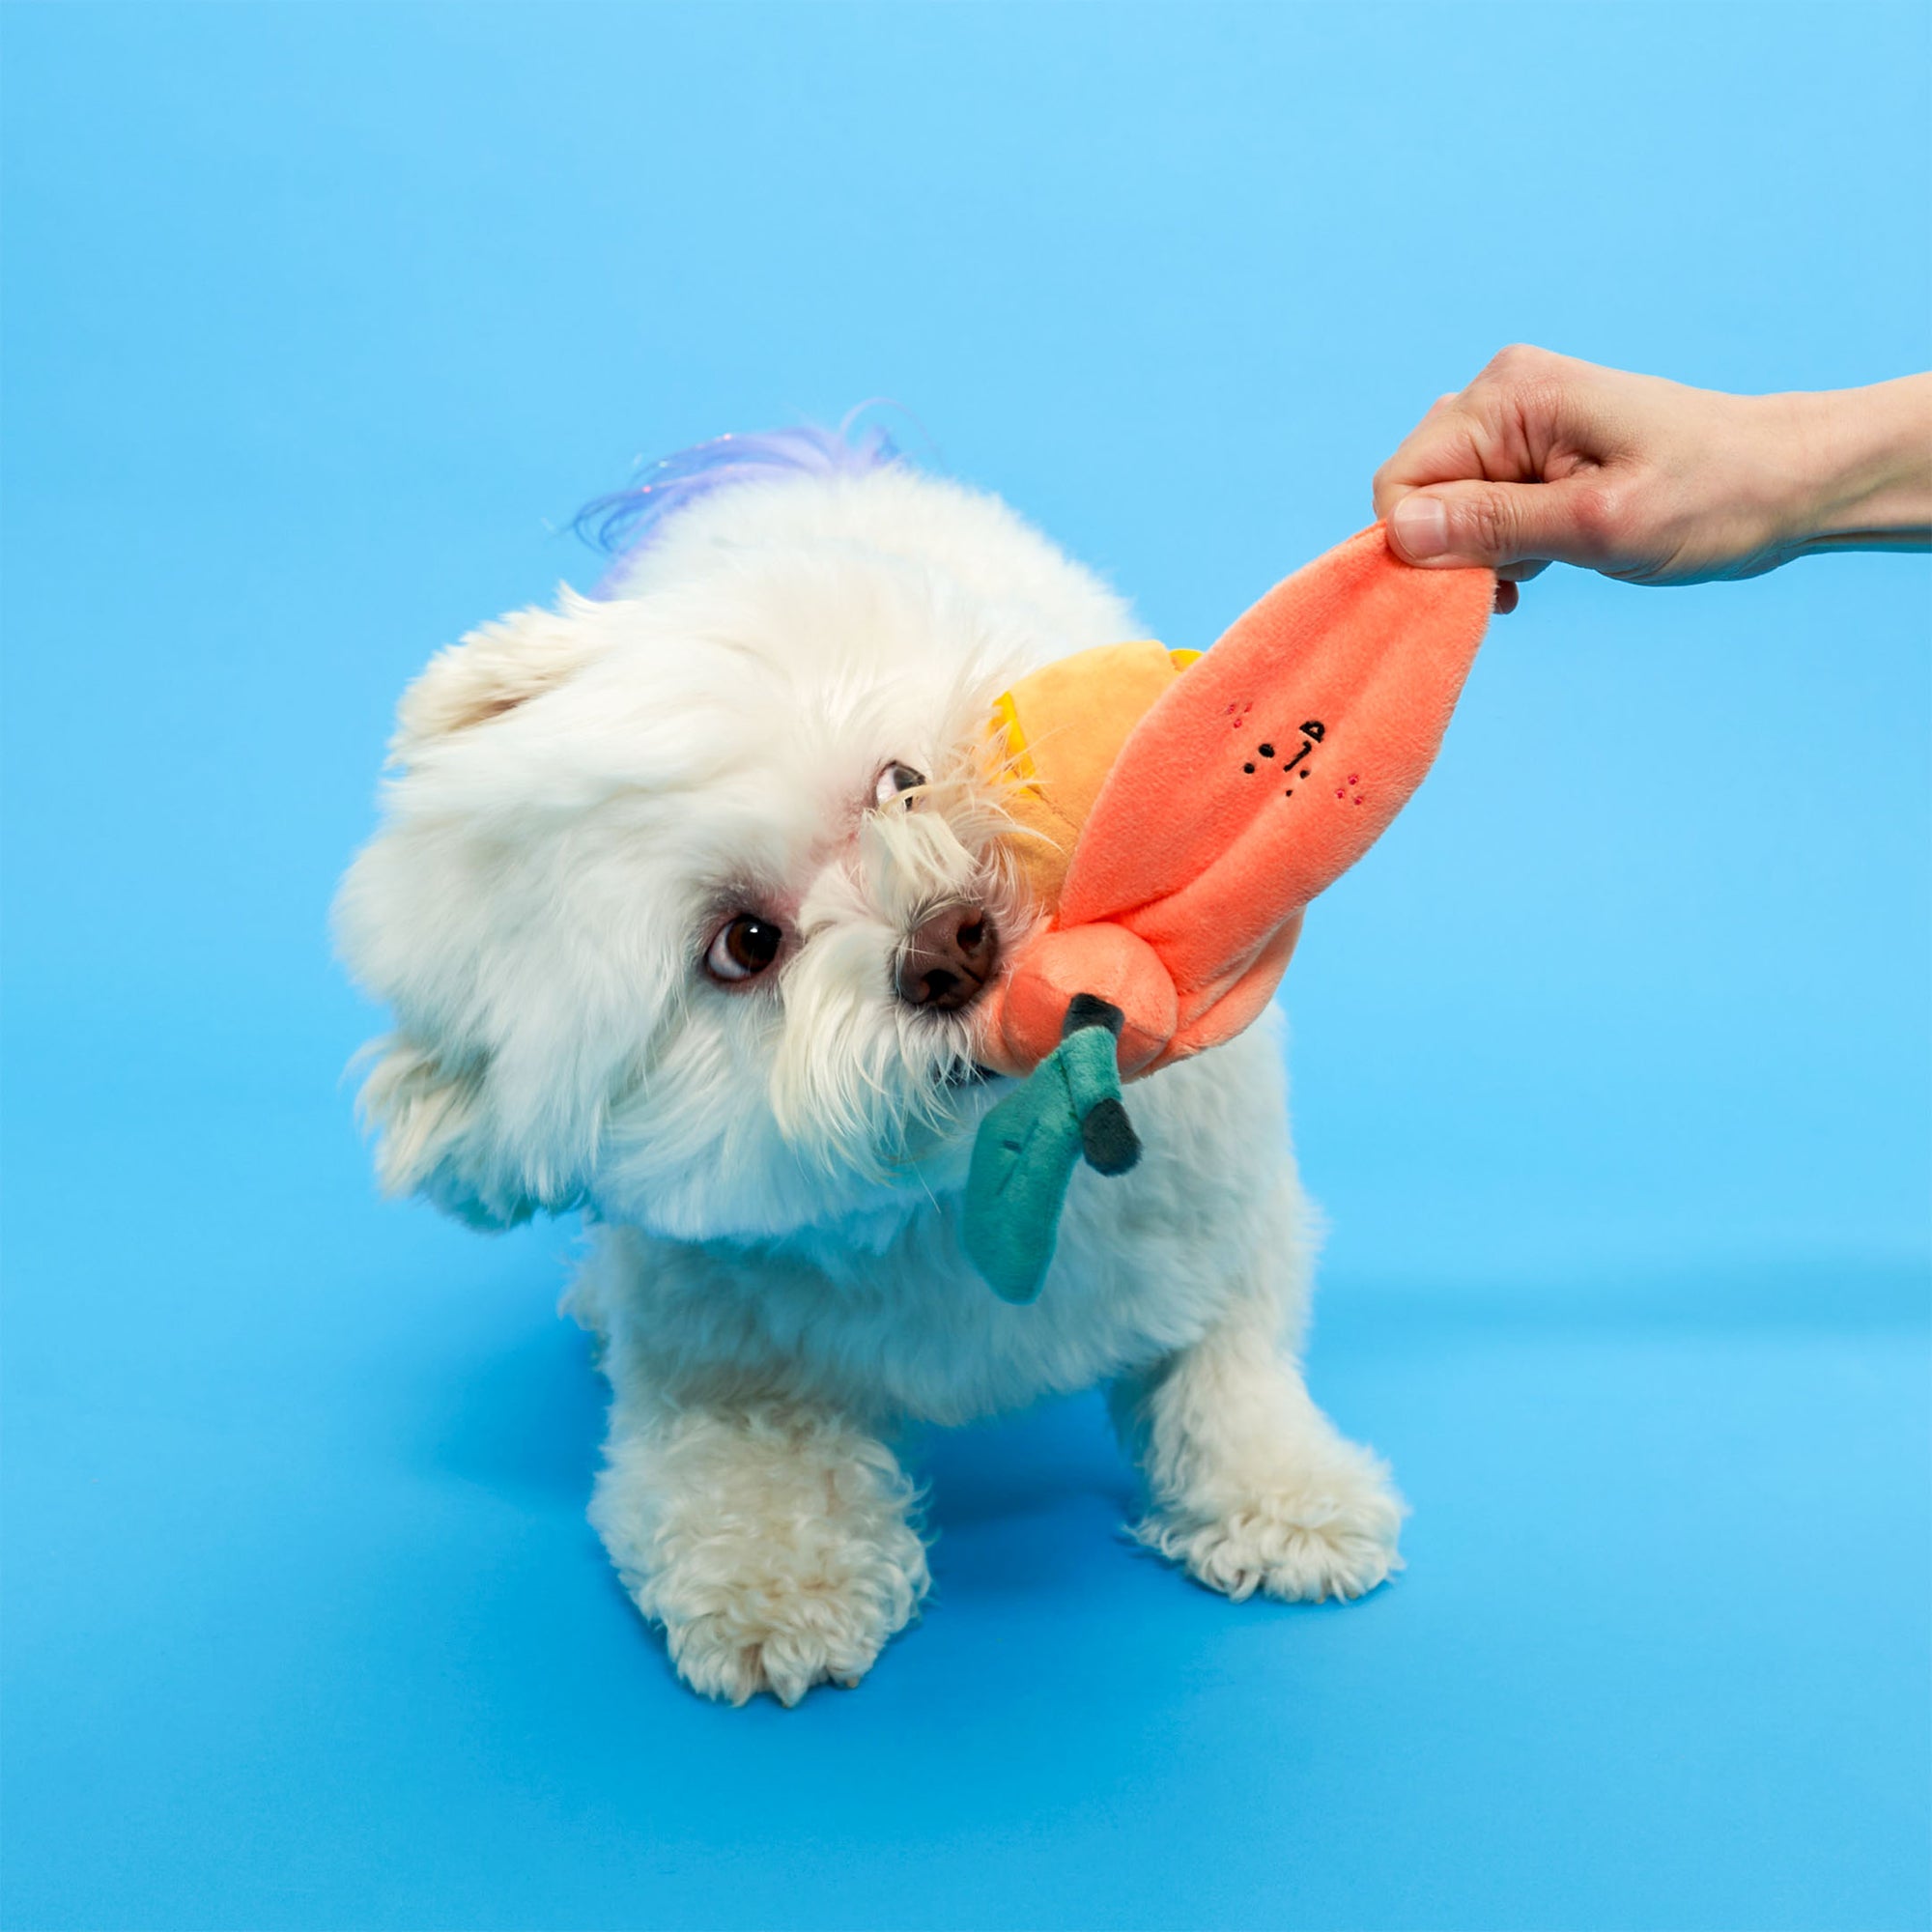 A white fluffy dog with a purple streak on its back is biting an orange-shaped dog toy that’s being held by a person's hand, all against a vibrant blue background.